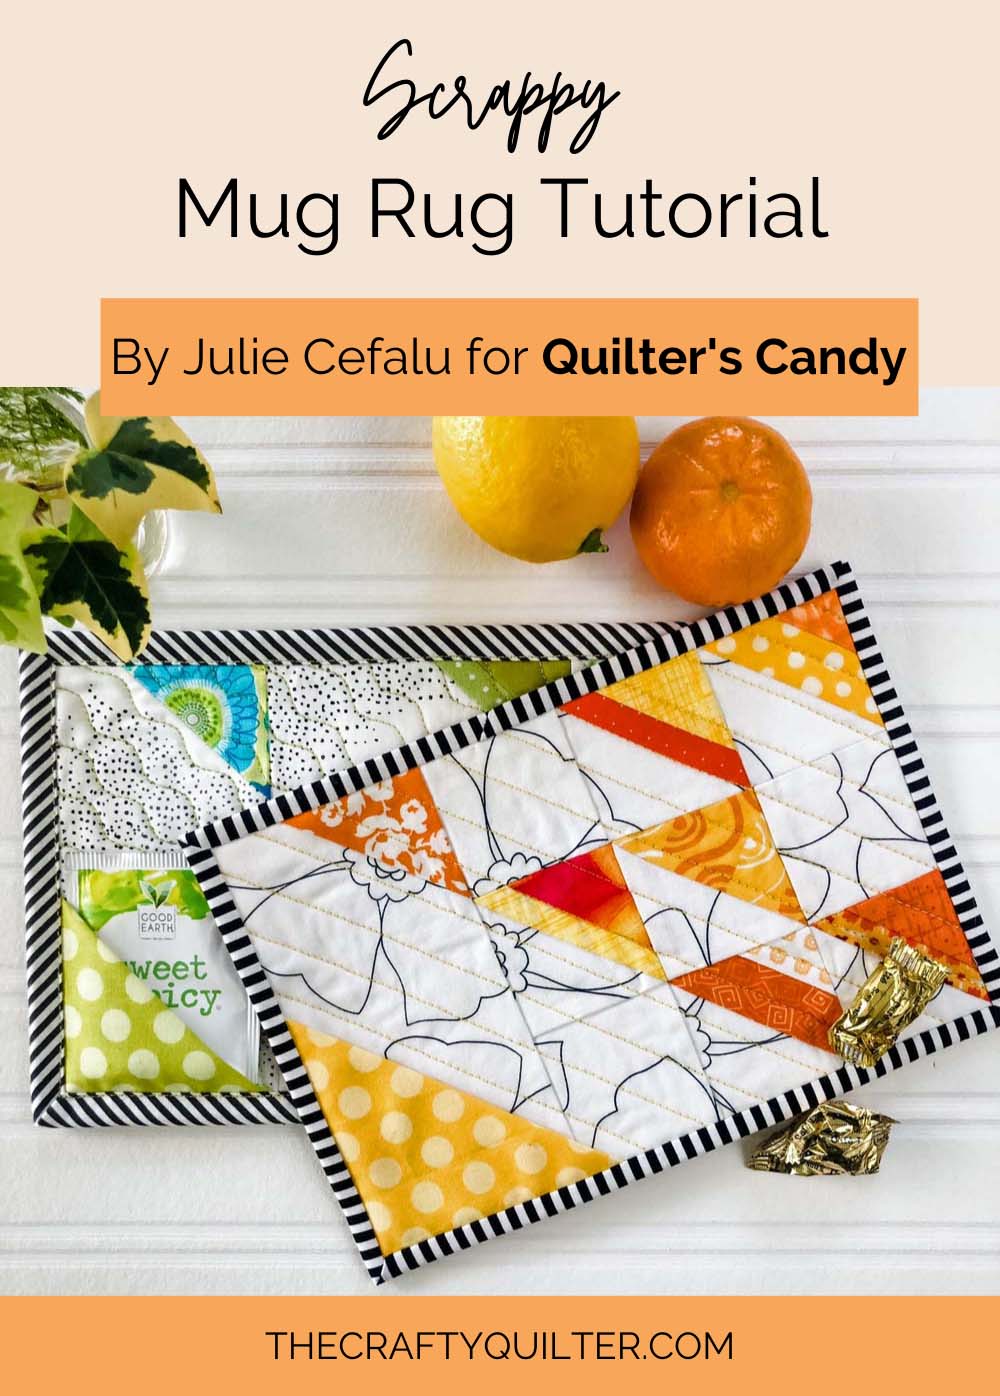 Scrappy Mug Rug Tutorial and Quilters Candy